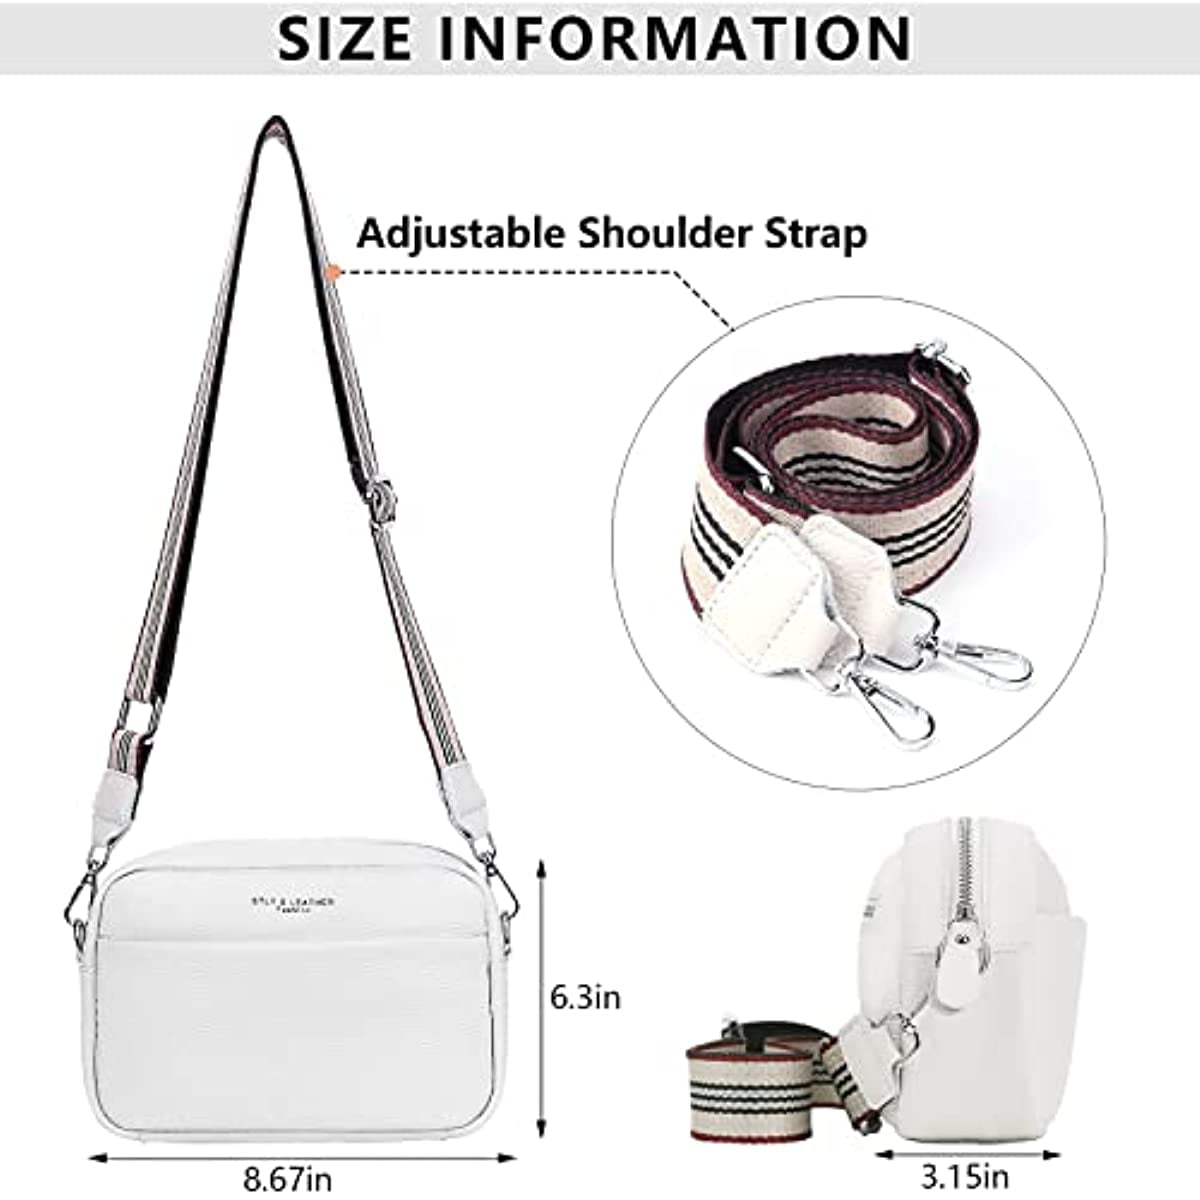 Small Crossbody Bags for Women Shoulder Bag Stylish Purses and Handbags  Designer Cell Phone Purse